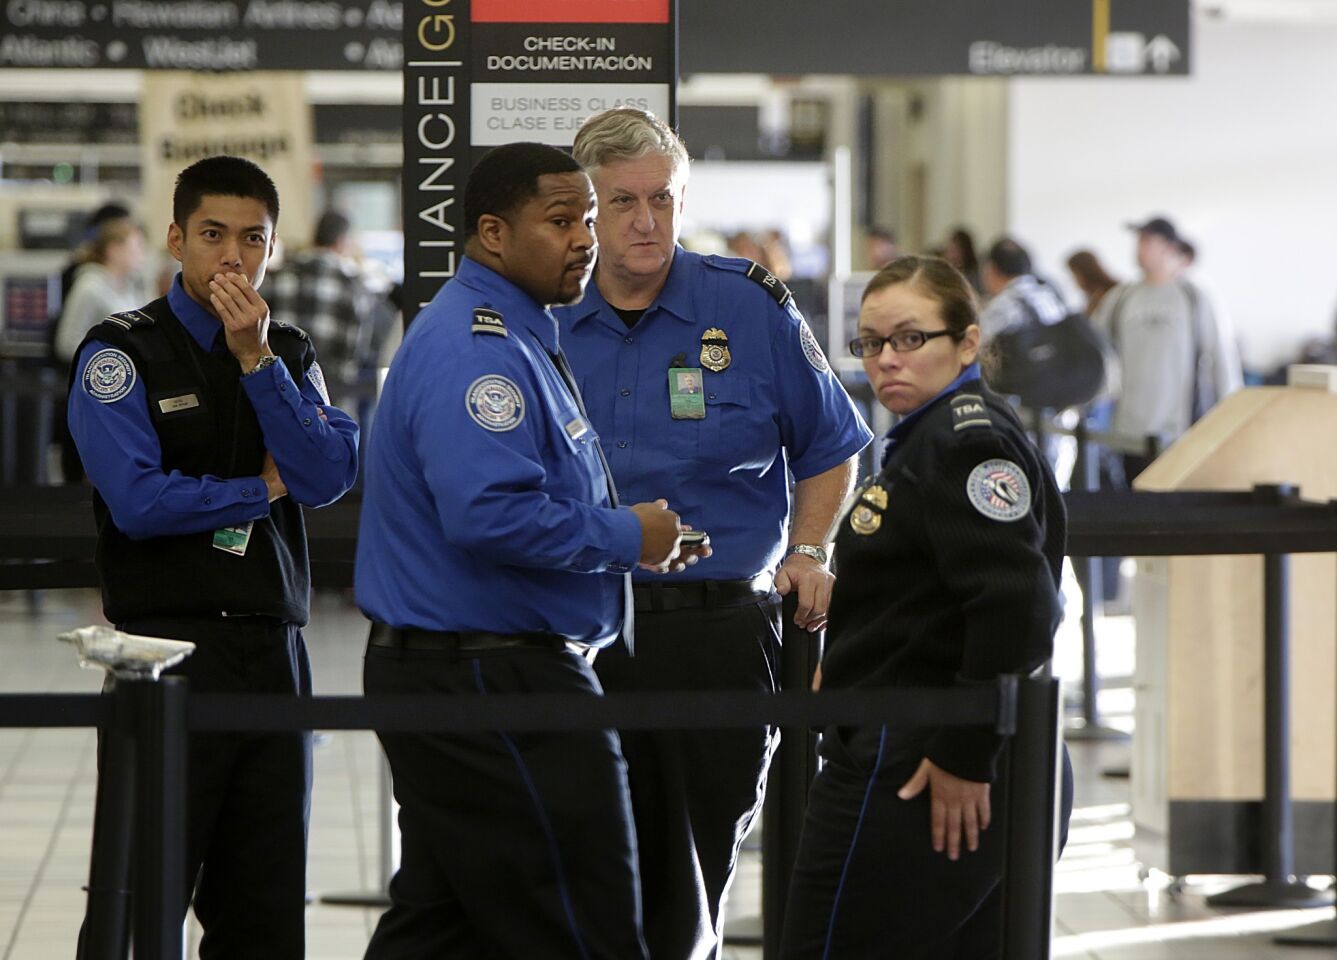 TSA officers are in very somber mood at the Terminal 3 check-in area.